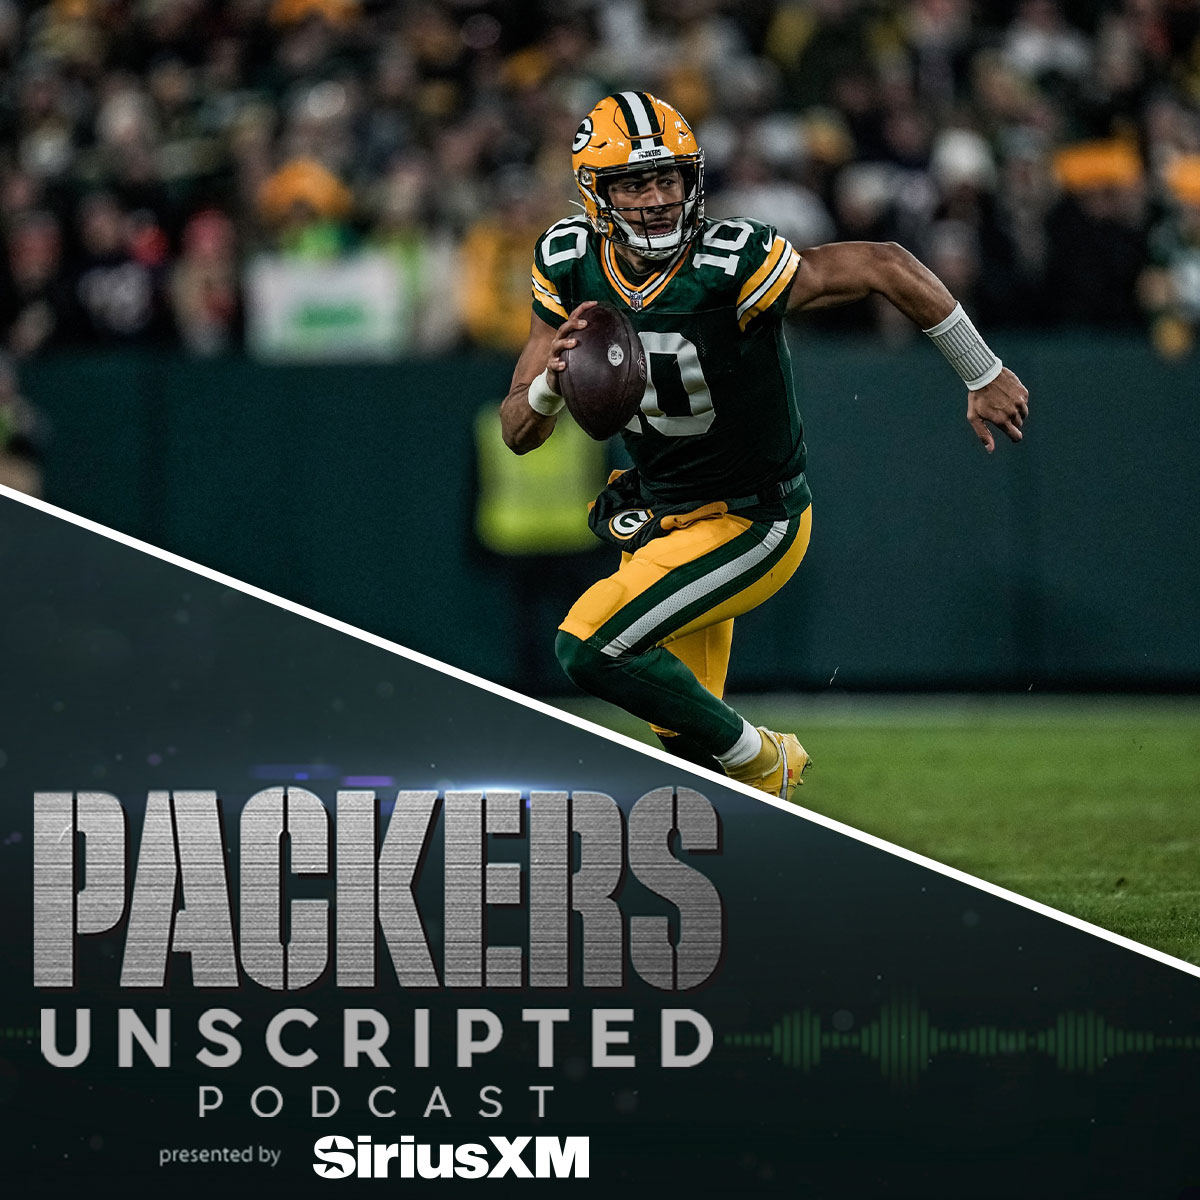 #760 Packers Unscripted: They’re in